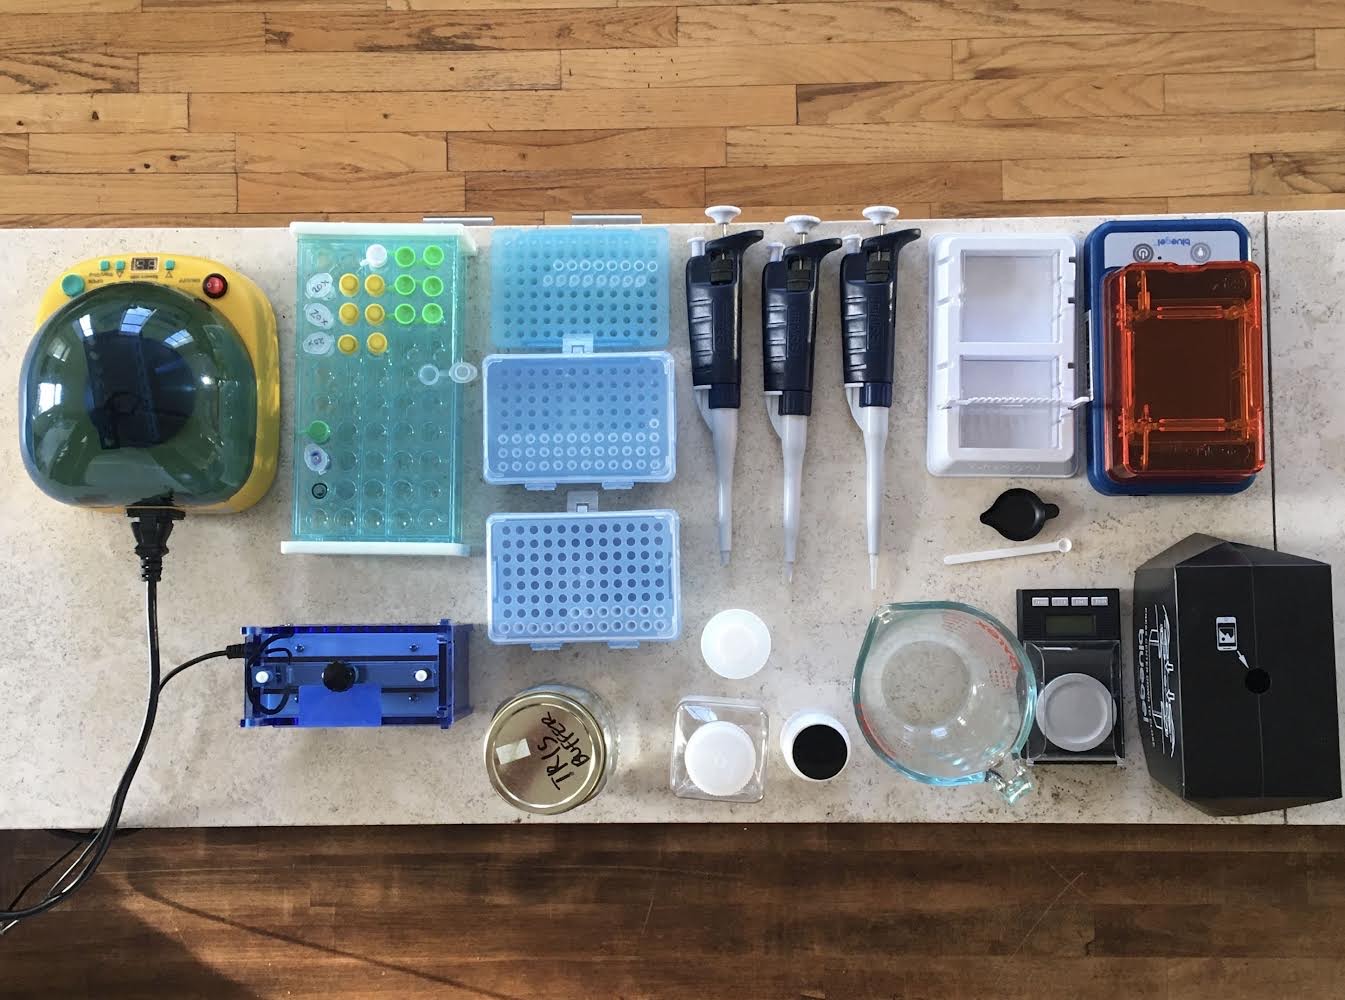 A photograph of the materials Jakob uses to sequence mushroom DNA, including a small centrifuge, pipettes, and various containers for storing samples.